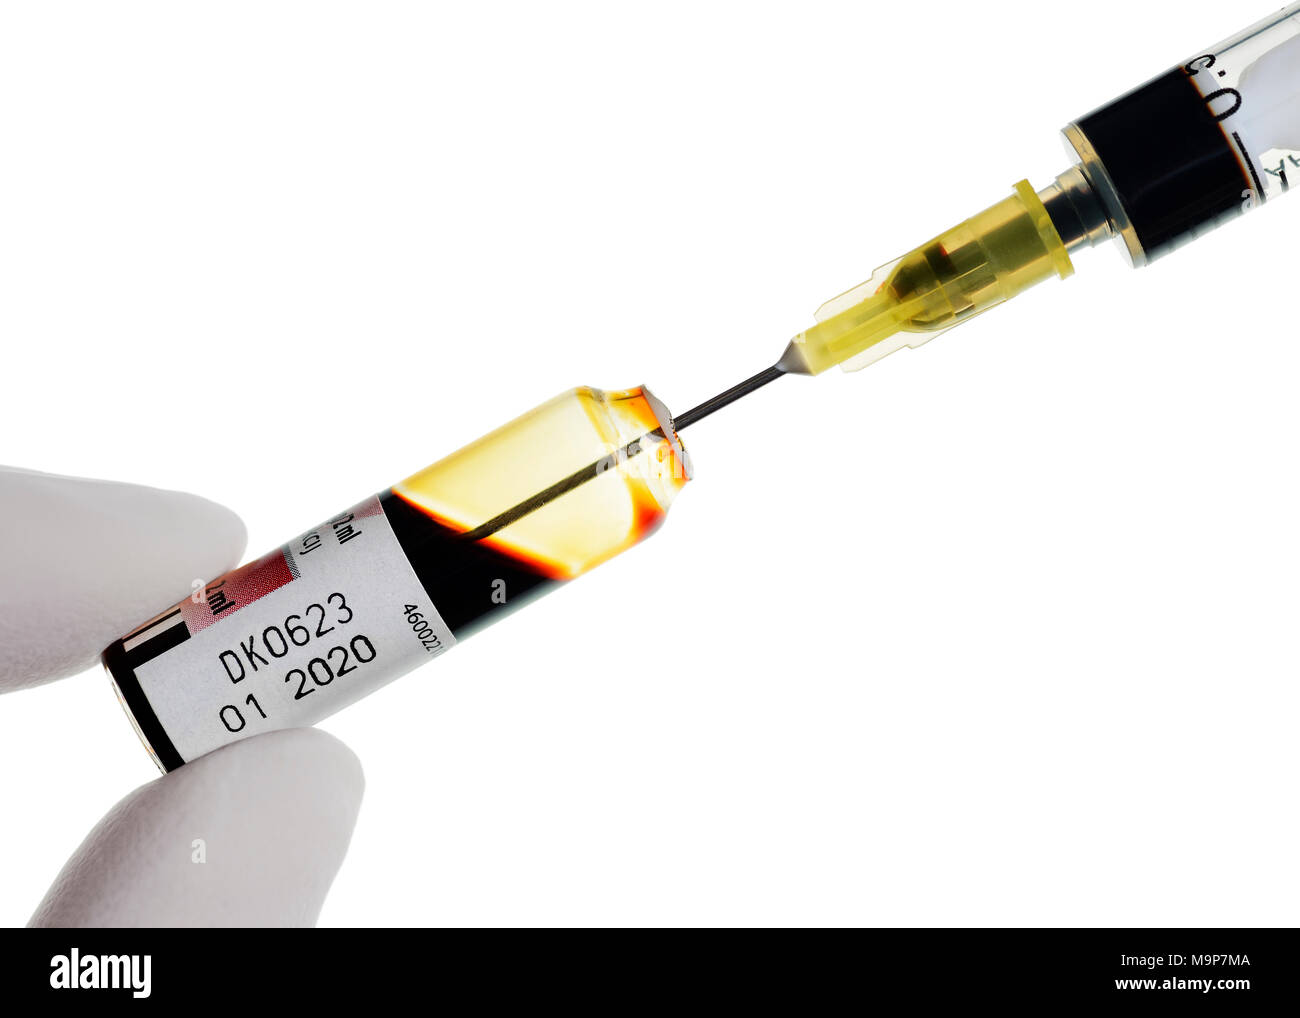 Vial and Syringe, Preparing for an Injection of Iron, used in the treatment of Anemia, Close Up Stock Photo